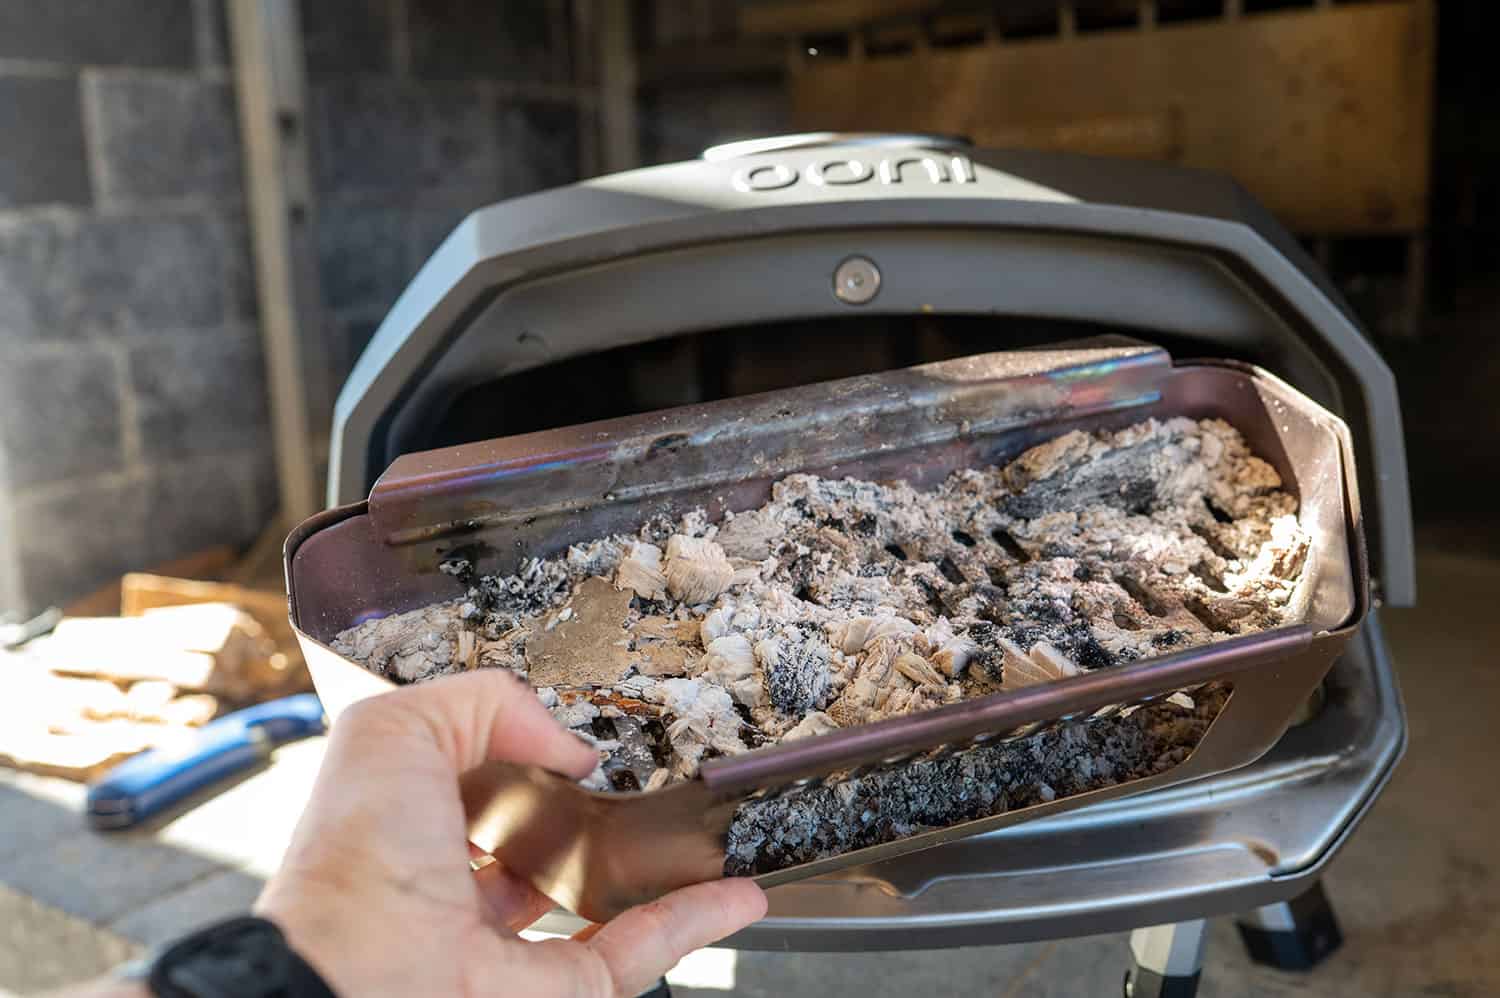 Removing ash from Ooni Pizza Oven.